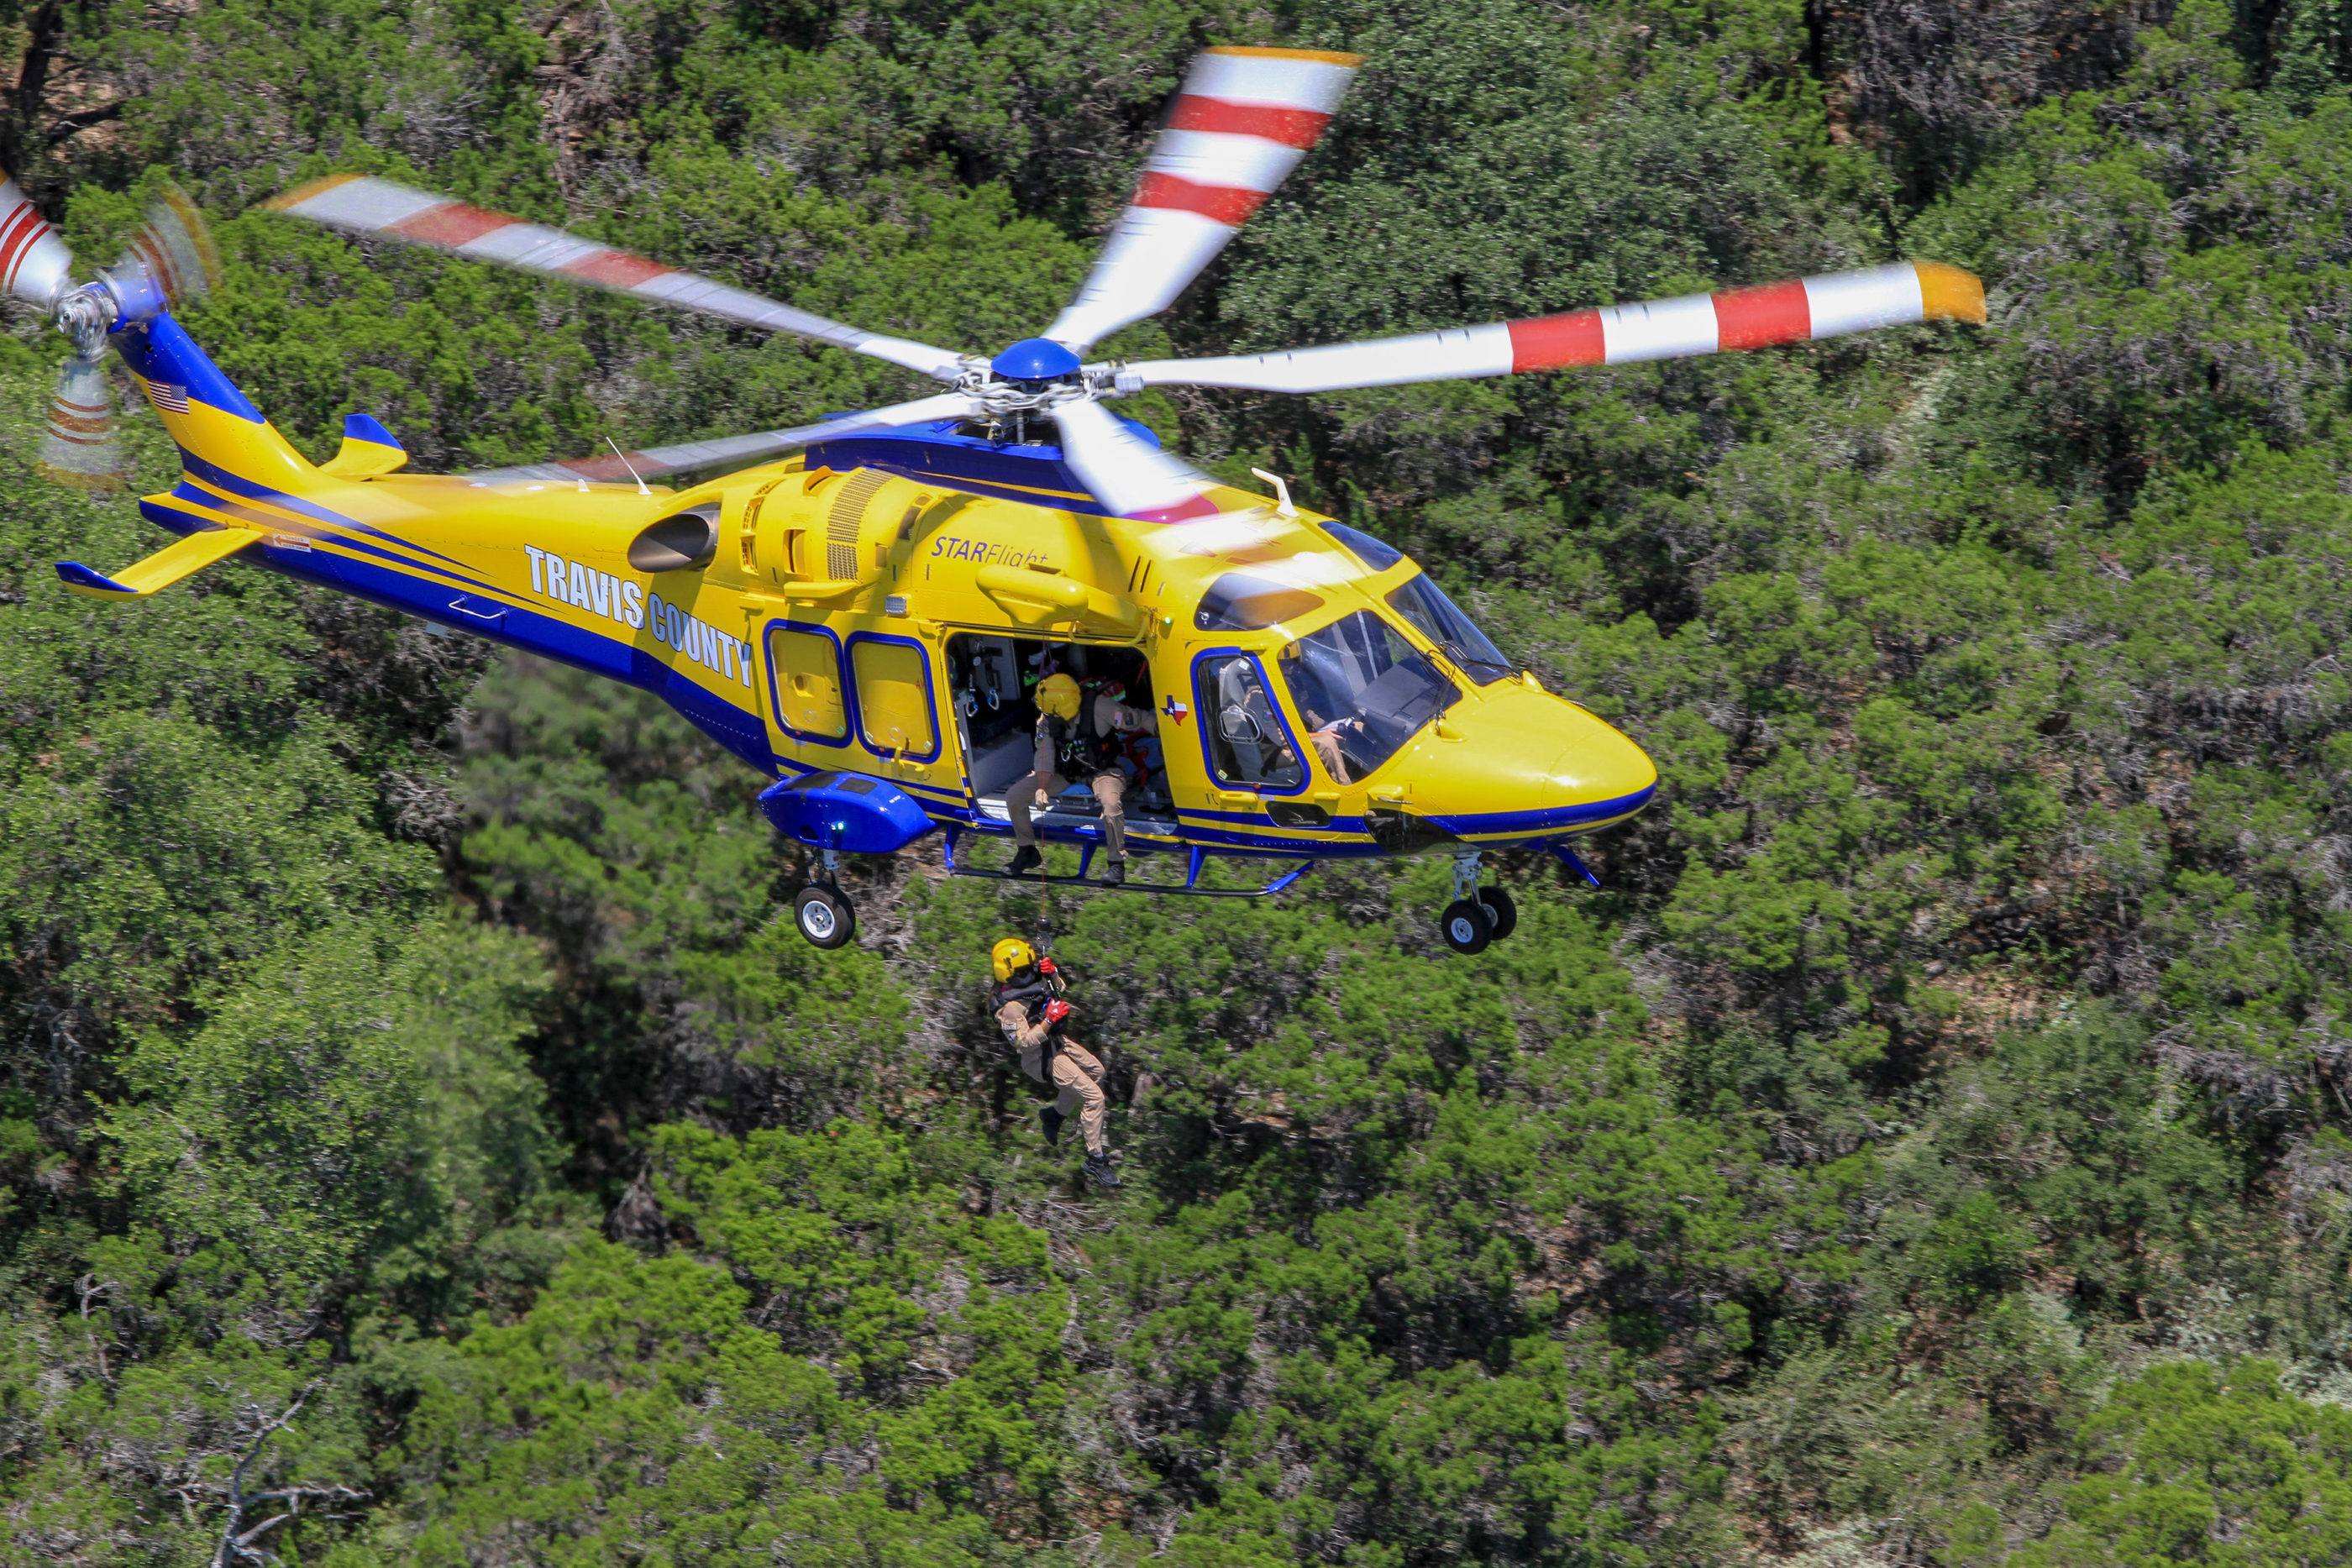 Travis County, Texas, has three AW169 EMS helicopters in service that perform highly specialized rescues for an area with over 1.2 million residents that includes Austin. Tim Pruitt Photo